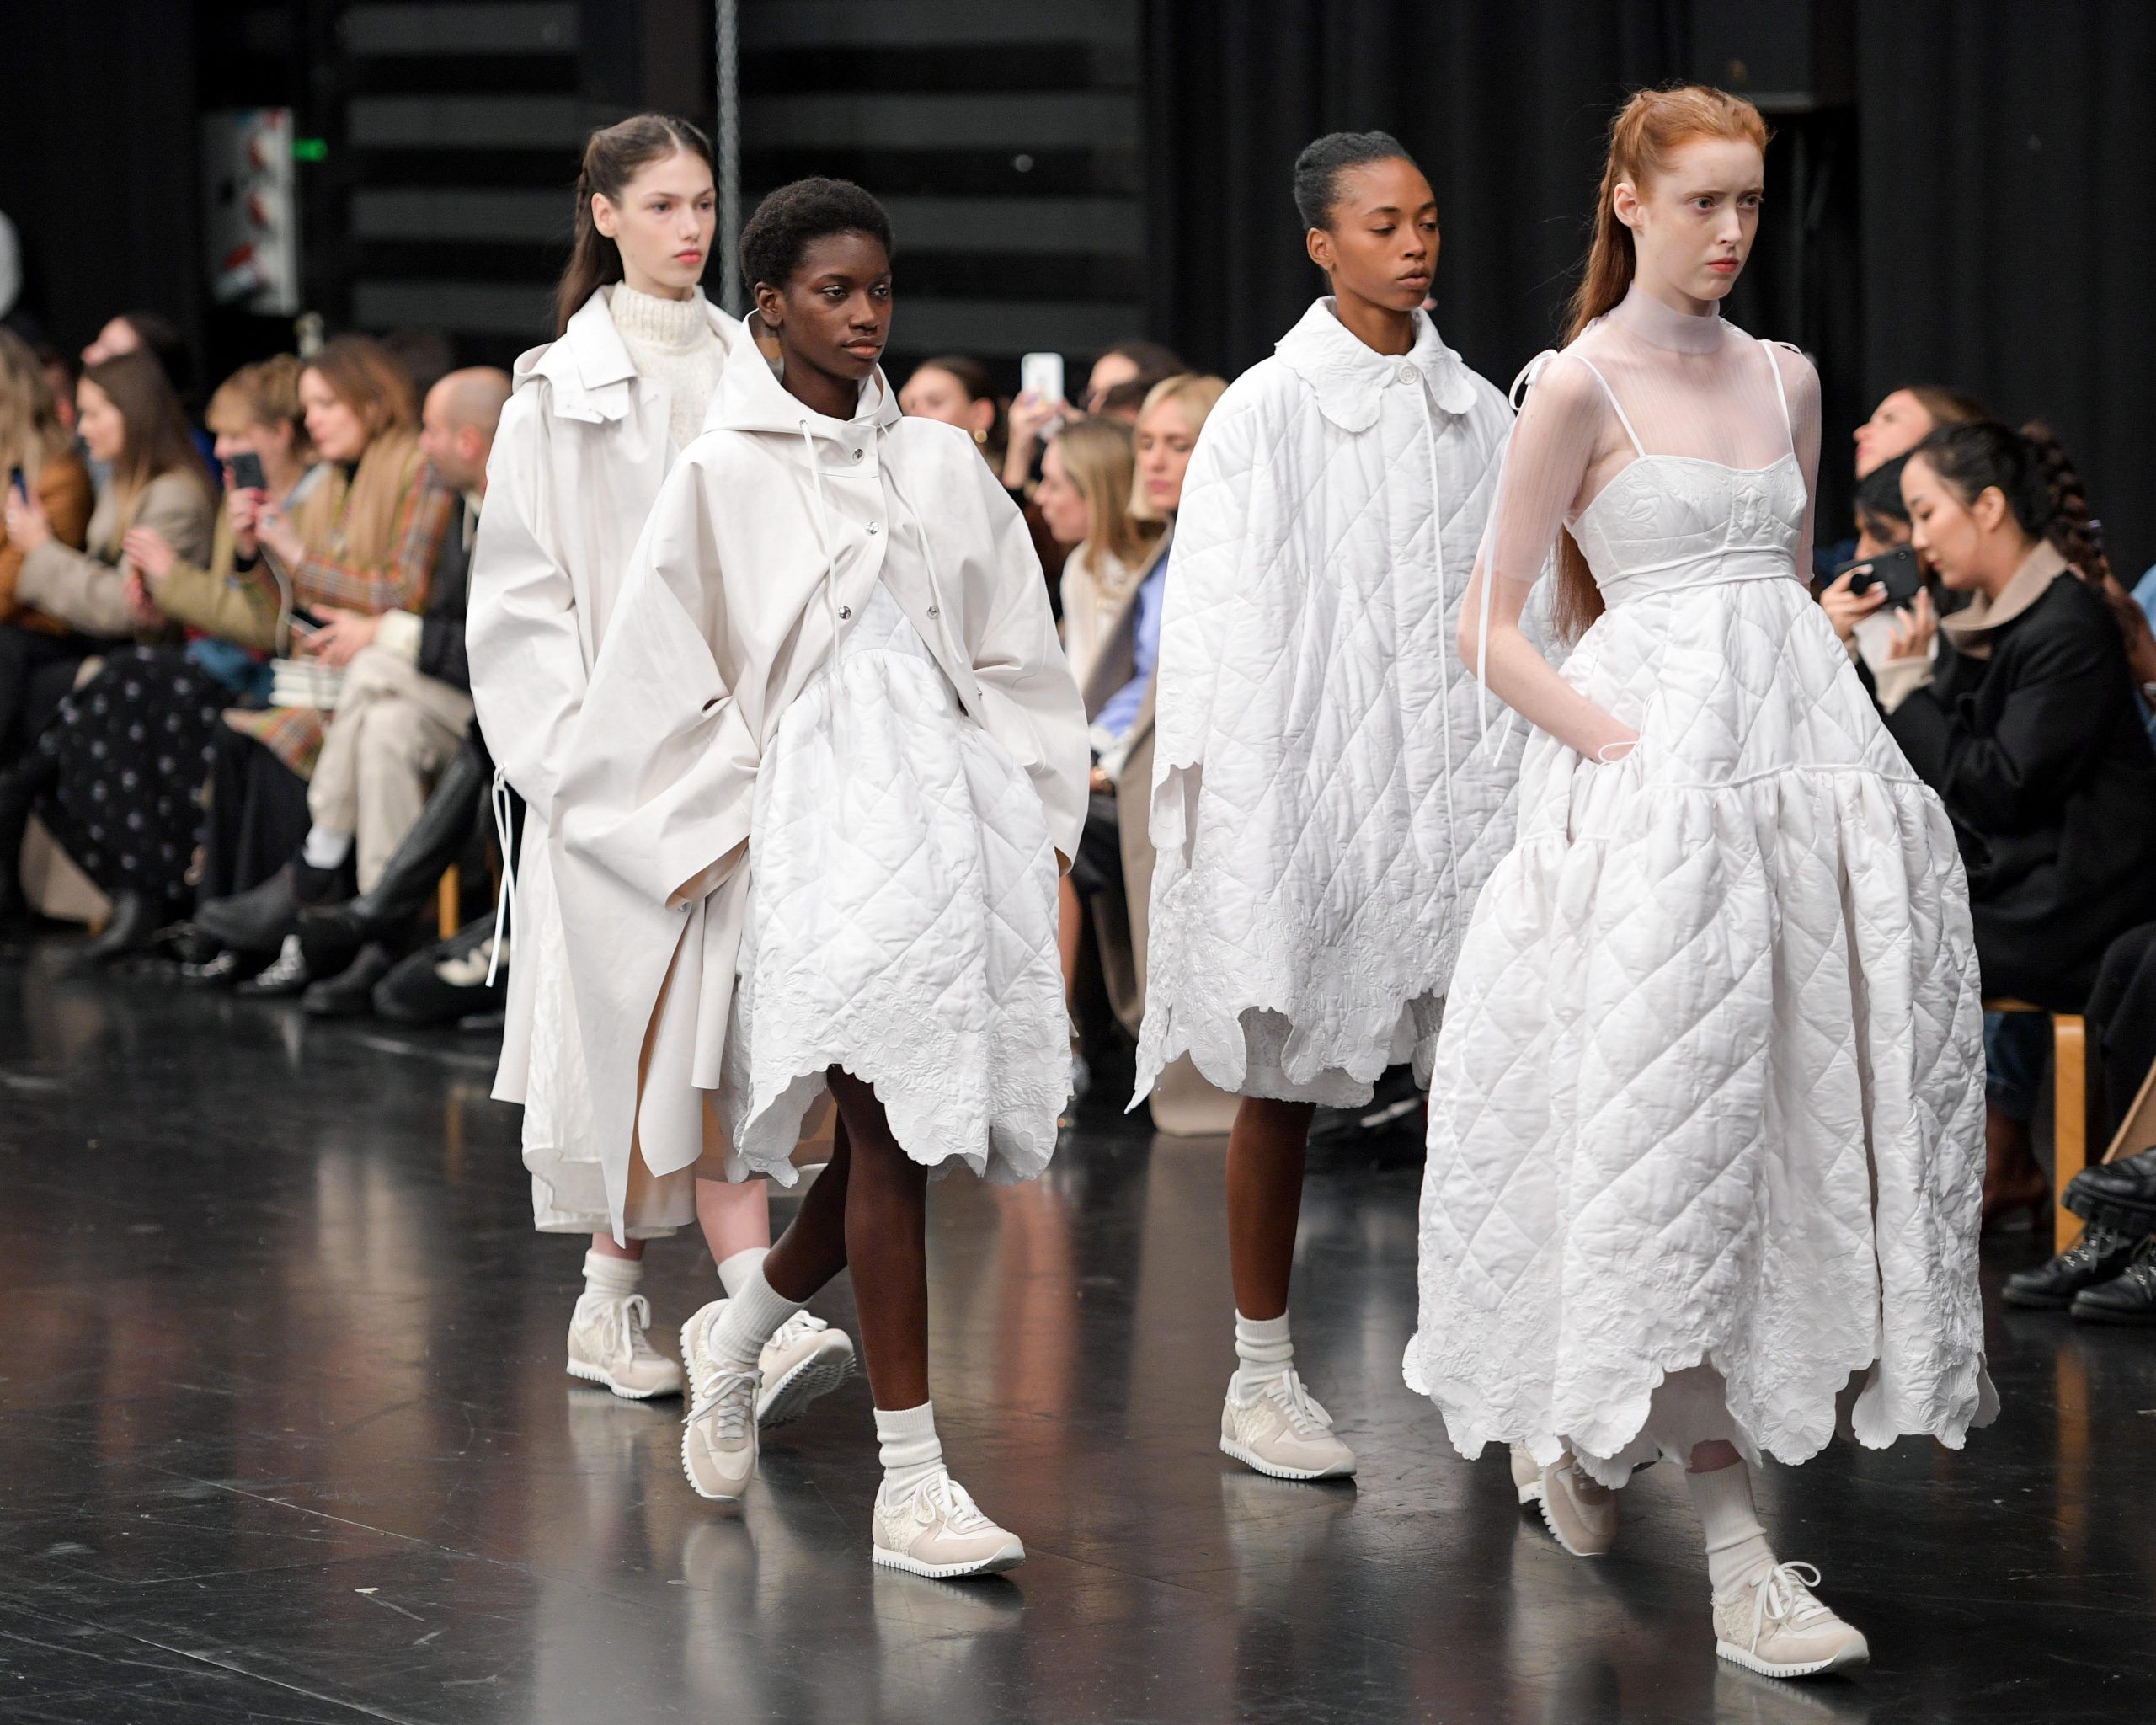 Copenhagen Fashion Week leaves us with an aftertaste of hope